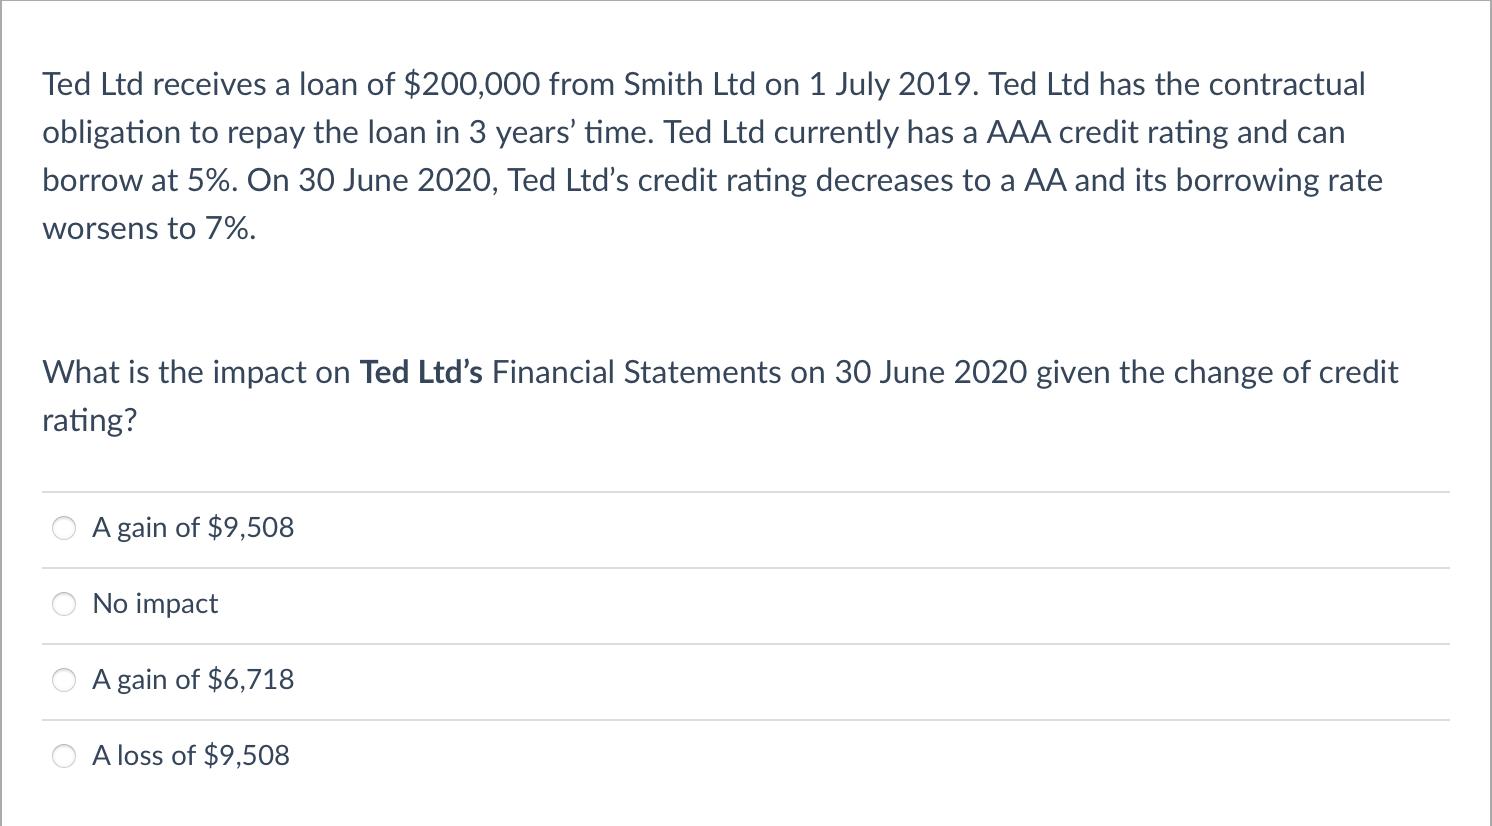 Ted Ltd receives a loan of ( $ 200,000 ) from Smith Ltd on 1 July 2019 . Ted Ltd has the contractual obligation to repay t